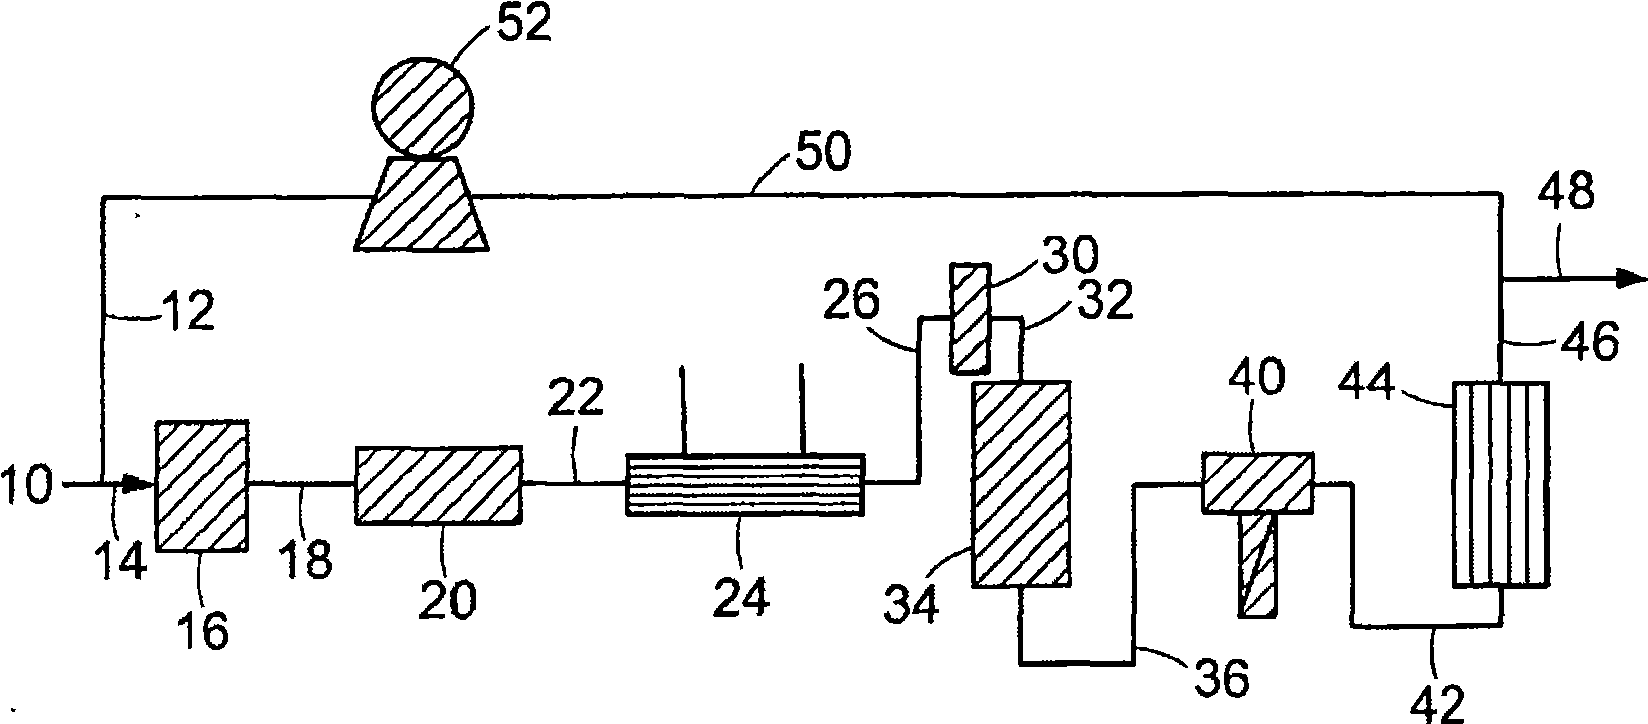 Apparatus and method for conditioning an immersion fluid